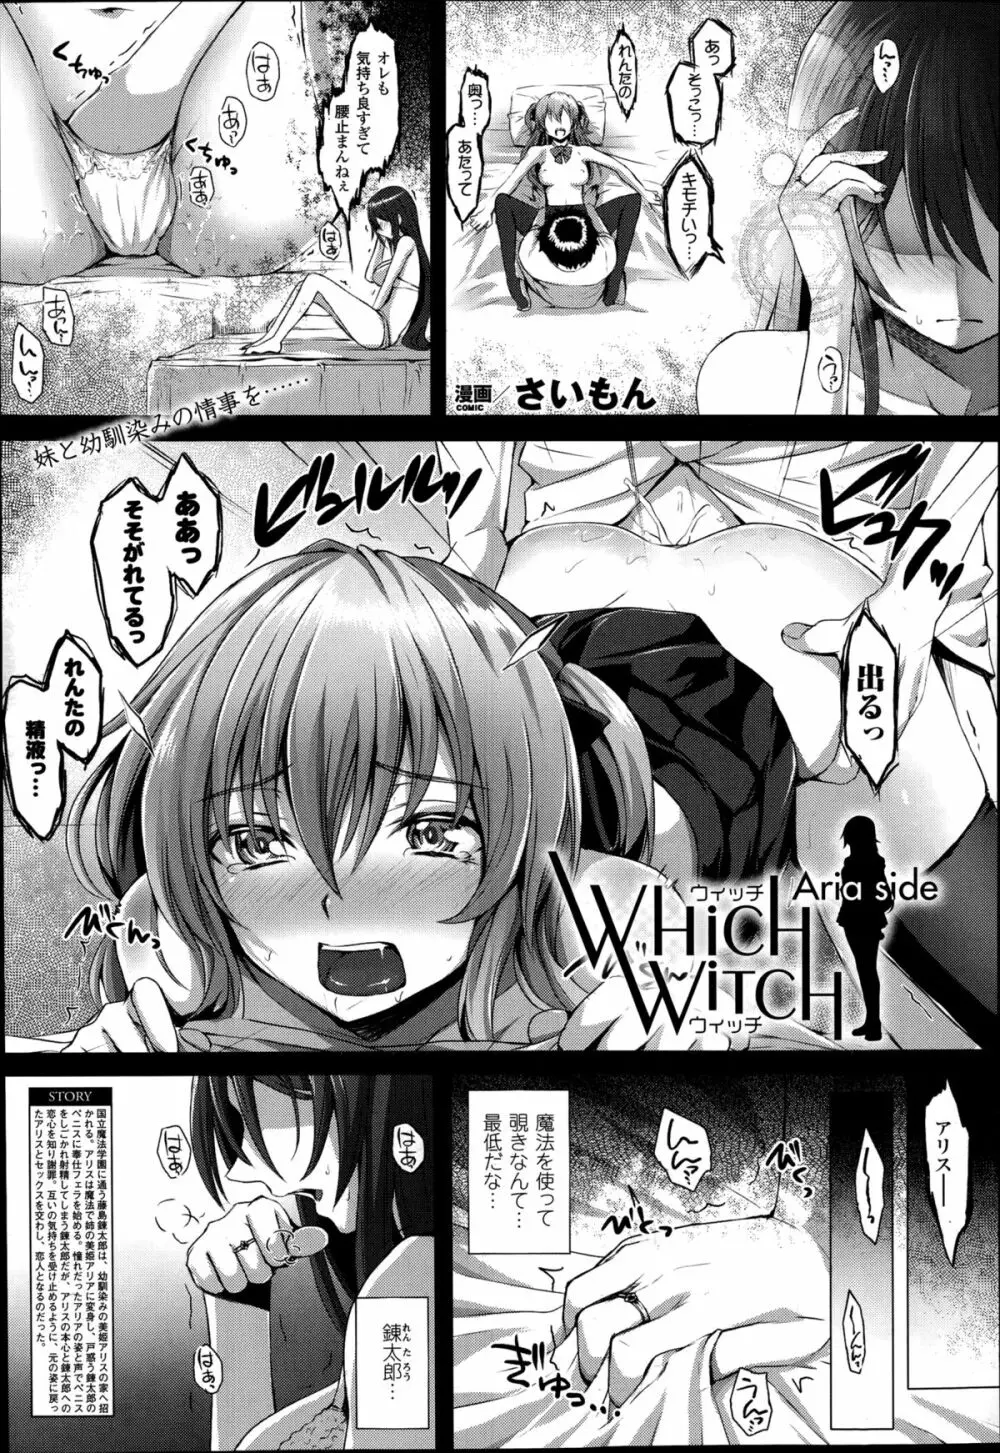 Which Witch 第1-2章 Page.19